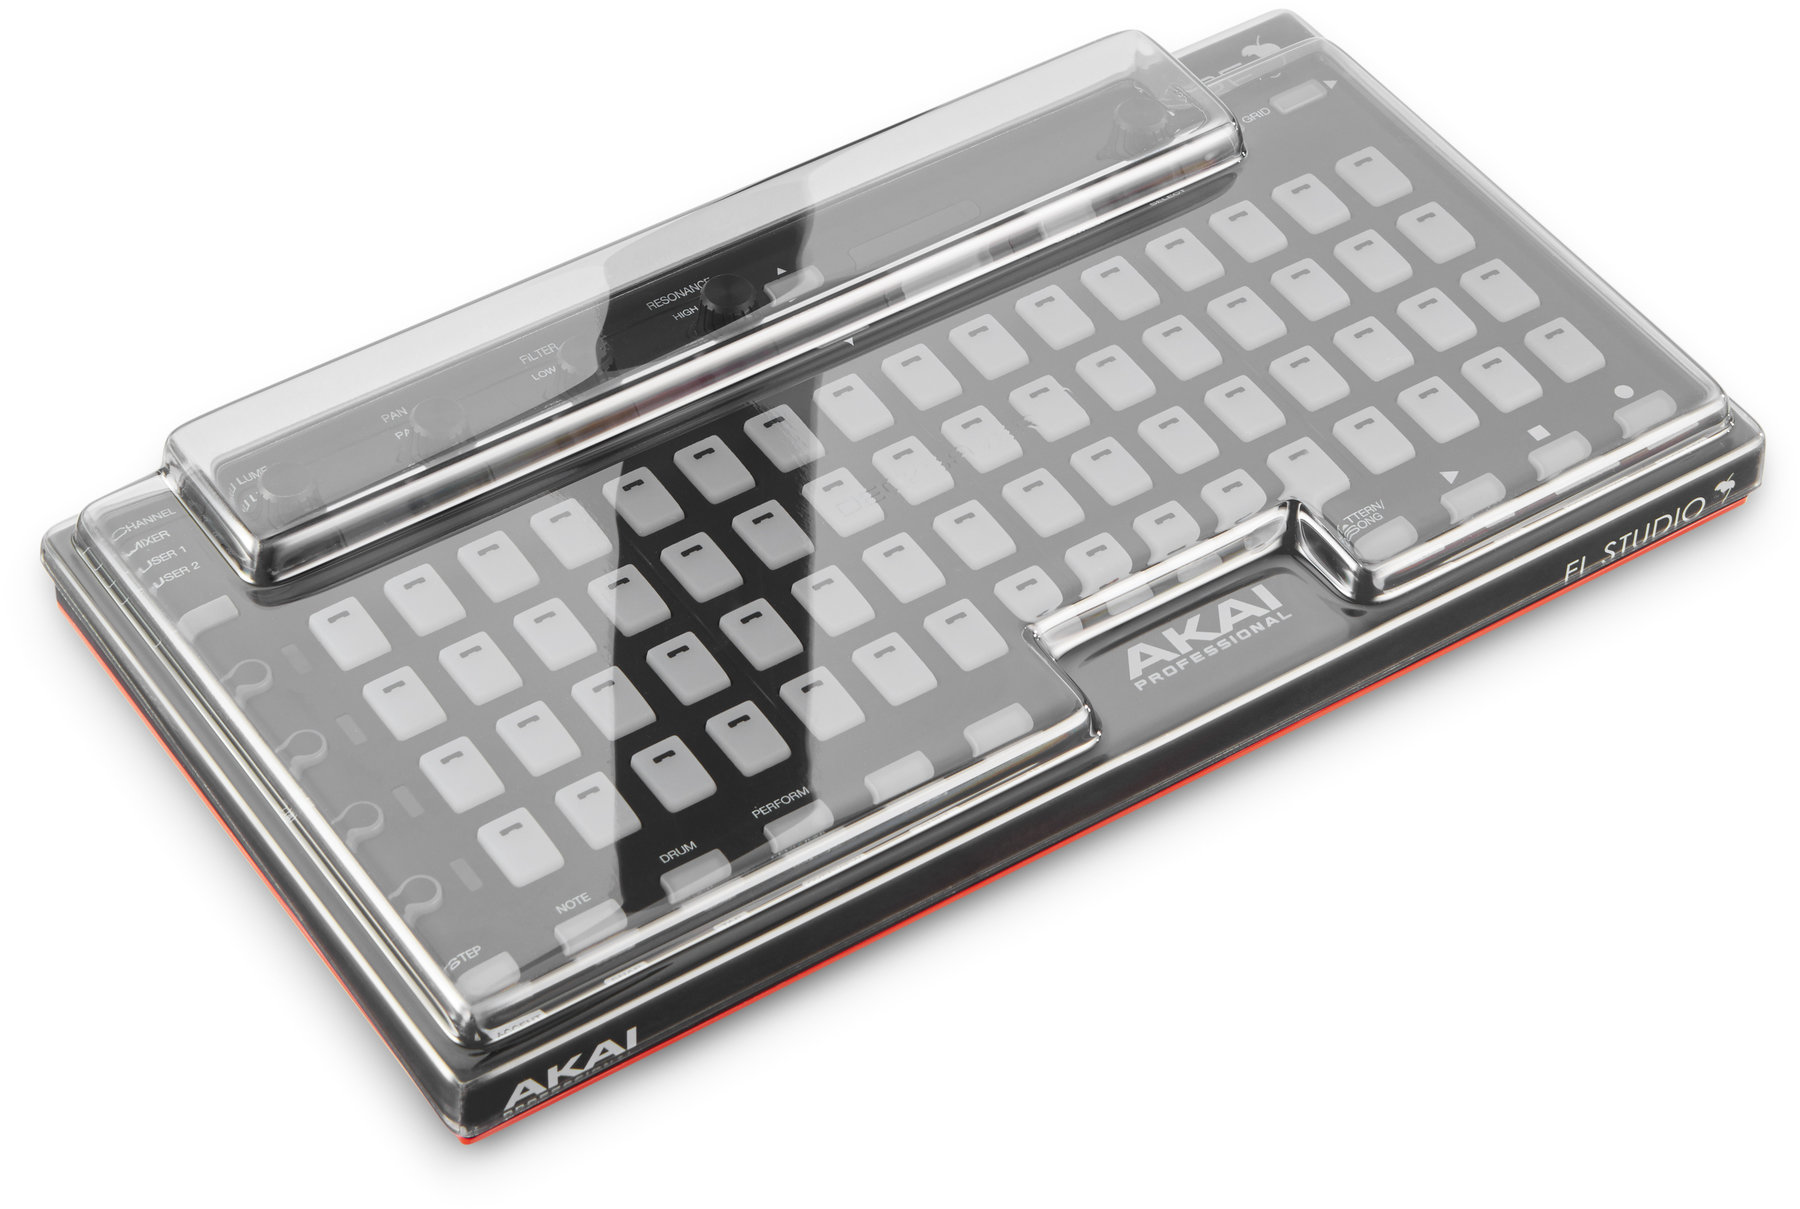 Protective cover cover for groovebox Decksaver Akai Pro Fire